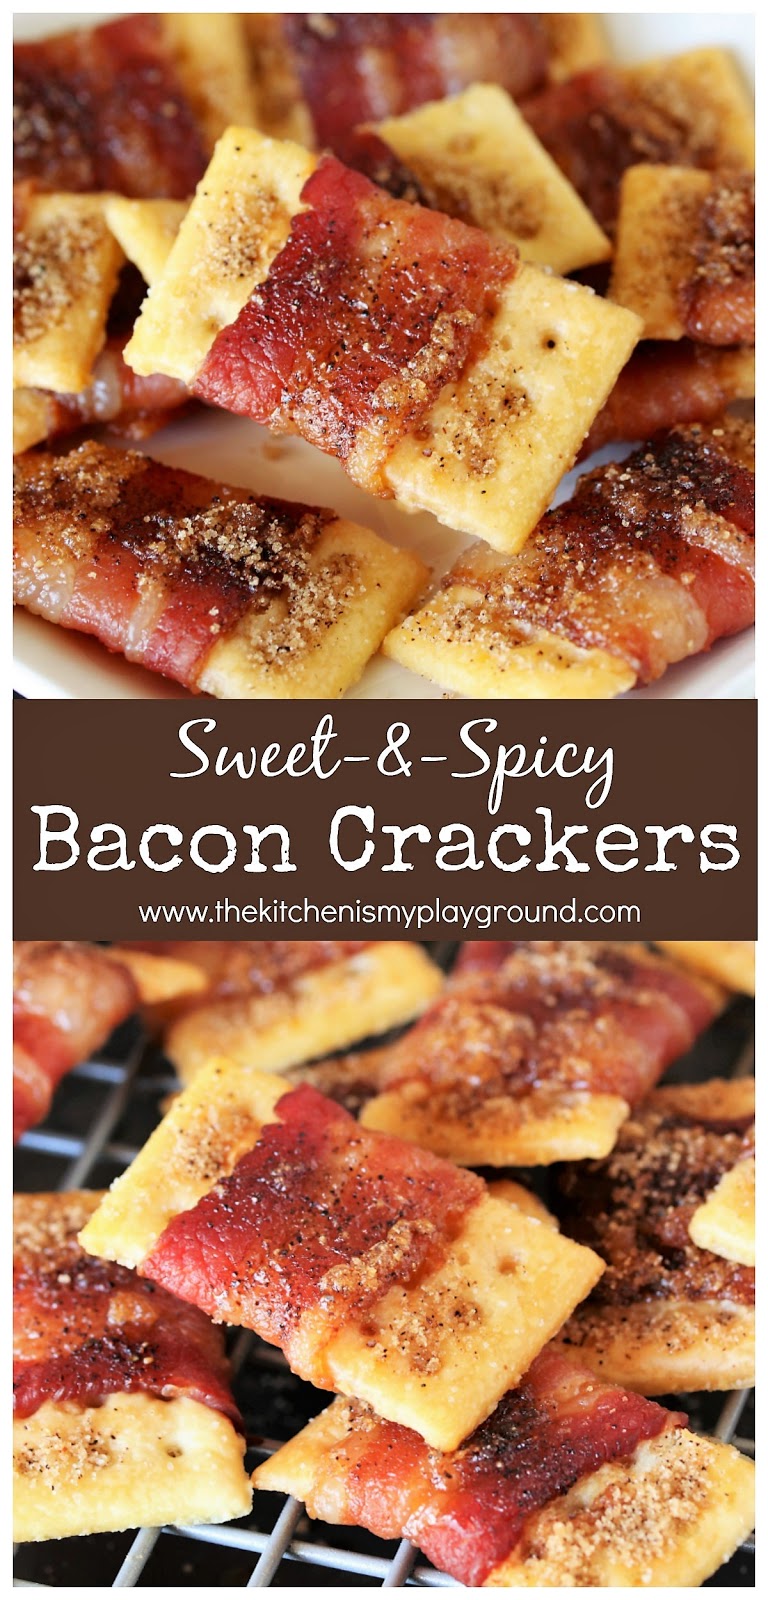 Sweet-&-Spicy Bacon Crackers | The Kitchen is My Playground